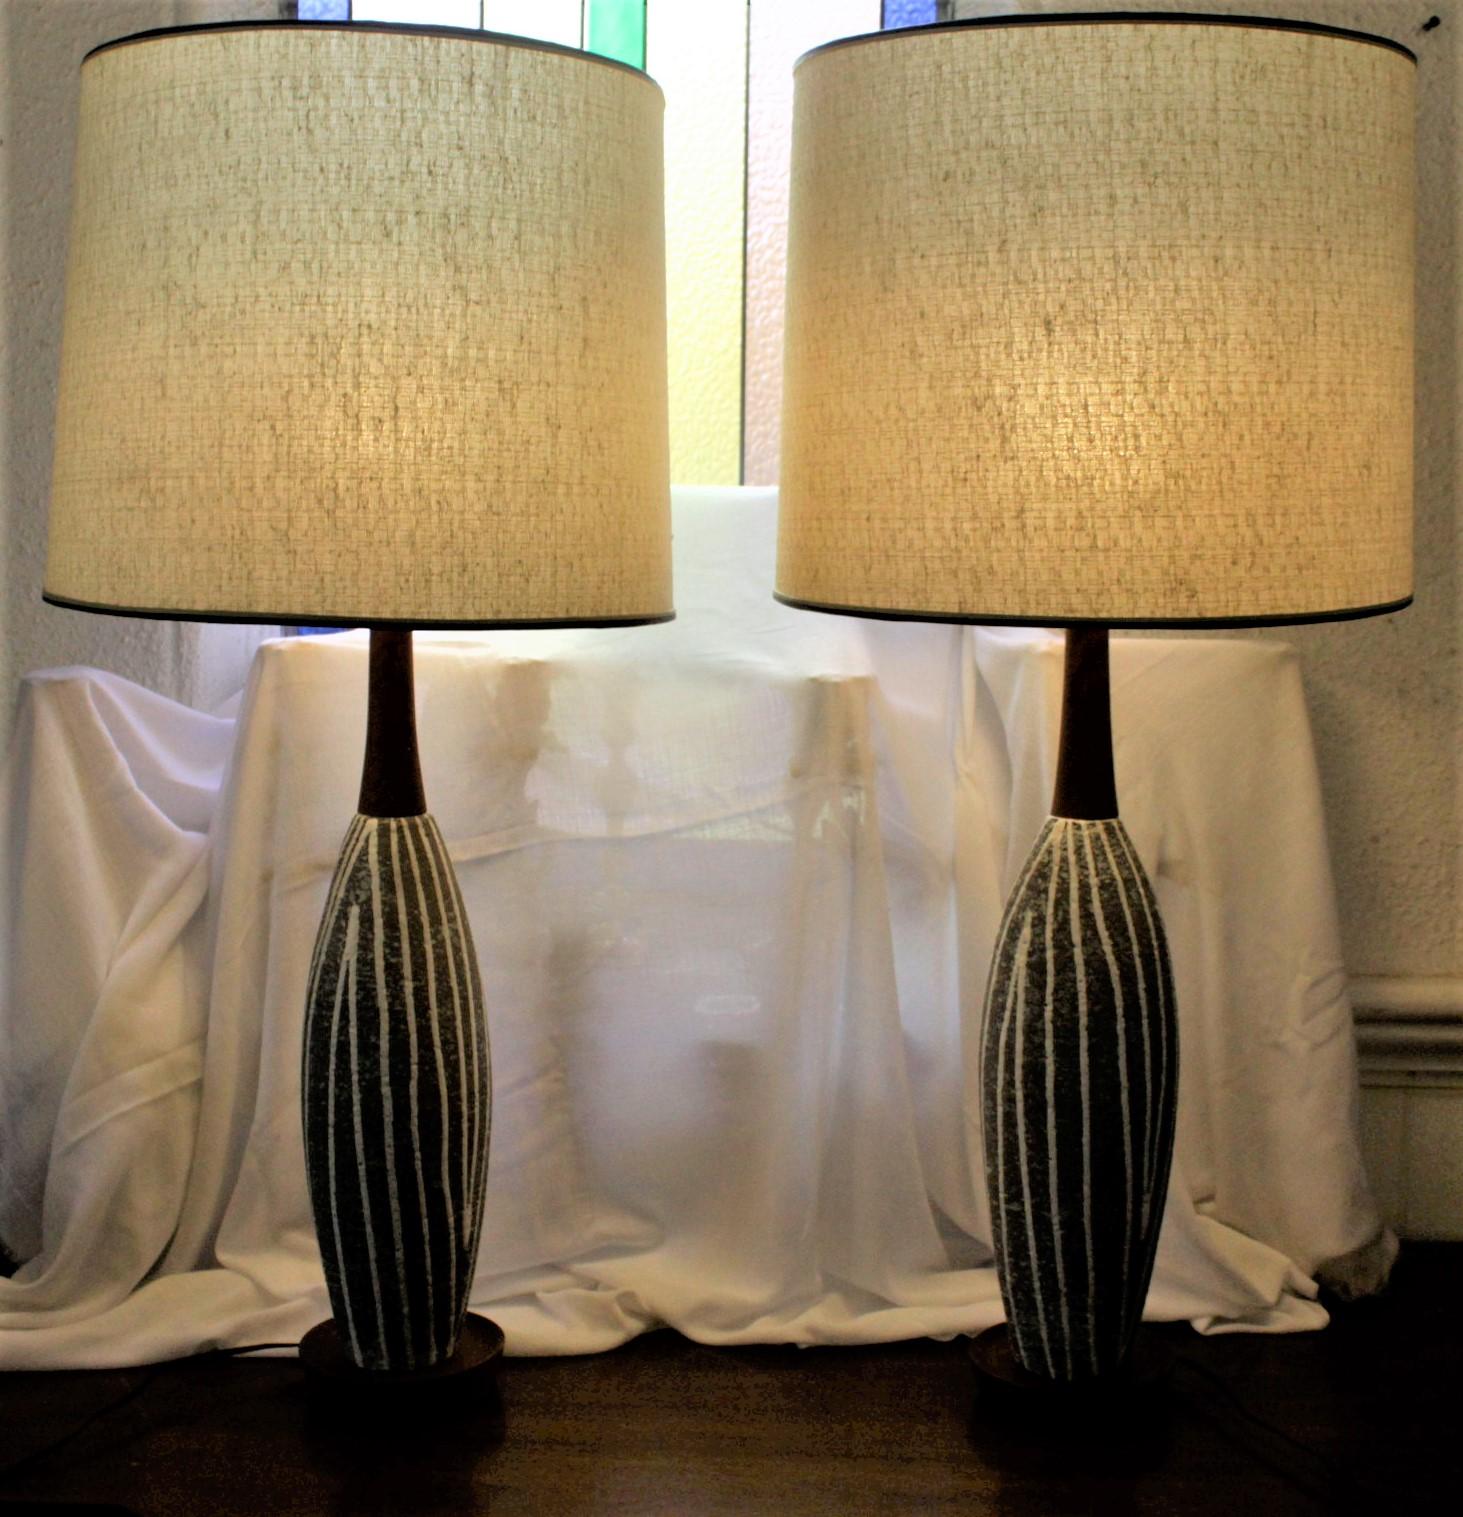 Pair of Upsala Ekeby Mid-Century Modern Pottery Table Lamps & Original Shades In Good Condition For Sale In Hamilton, Ontario